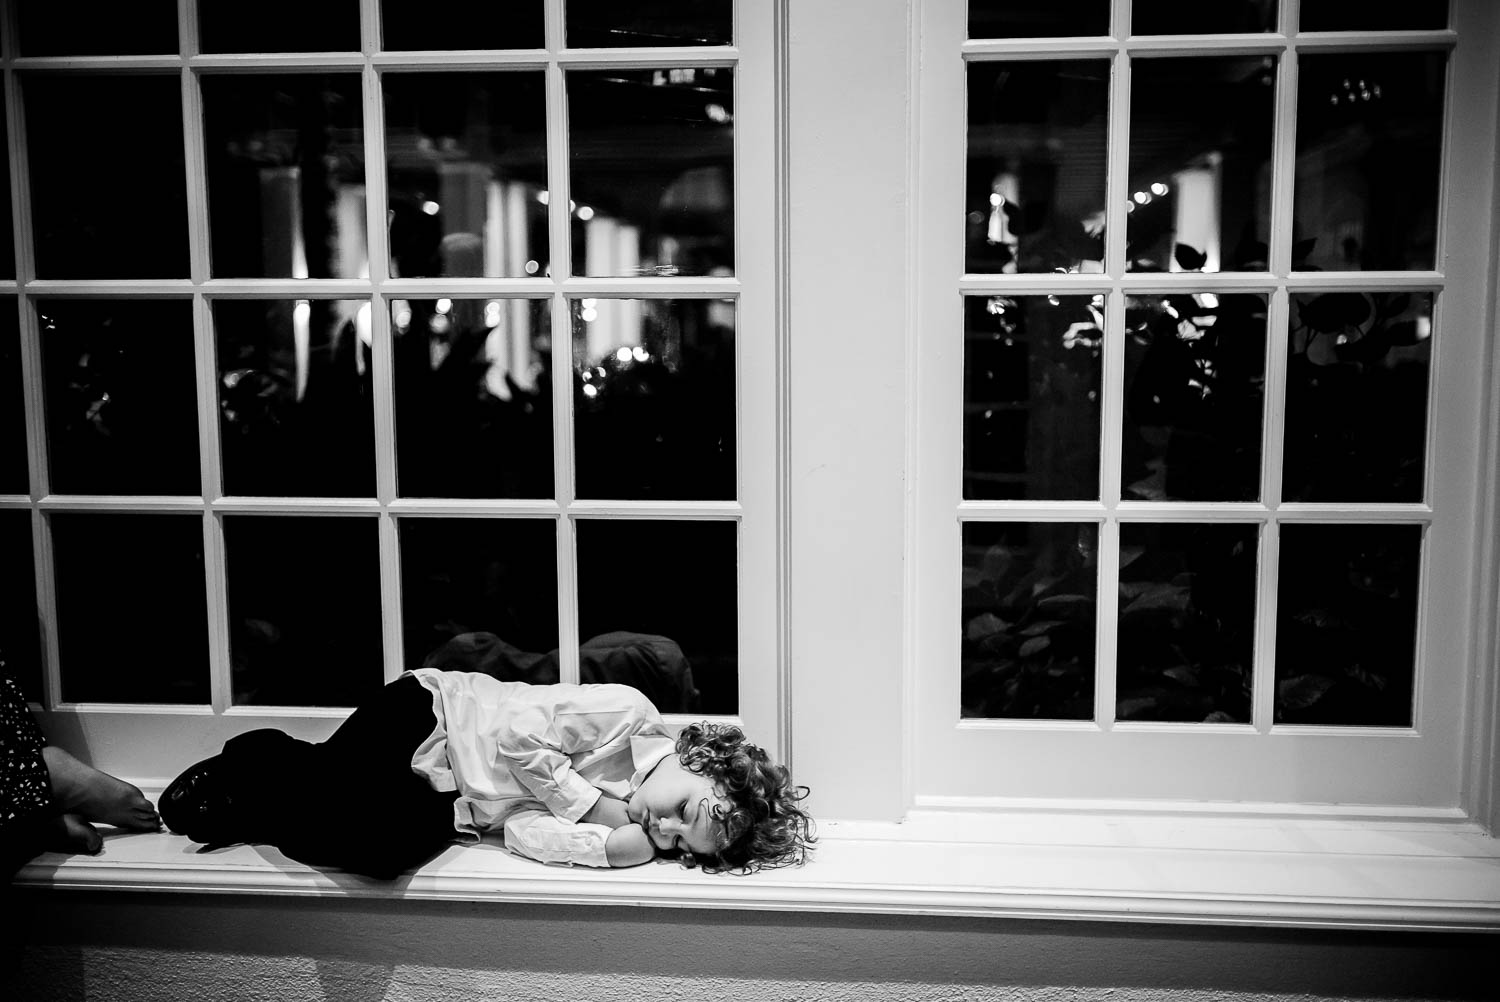 Little boy asleep is captured at wedding reception Hotel Galvez wedding reception in Corpus Christie, Texas. Photographed by Philip Thomas with a Leica M(240).